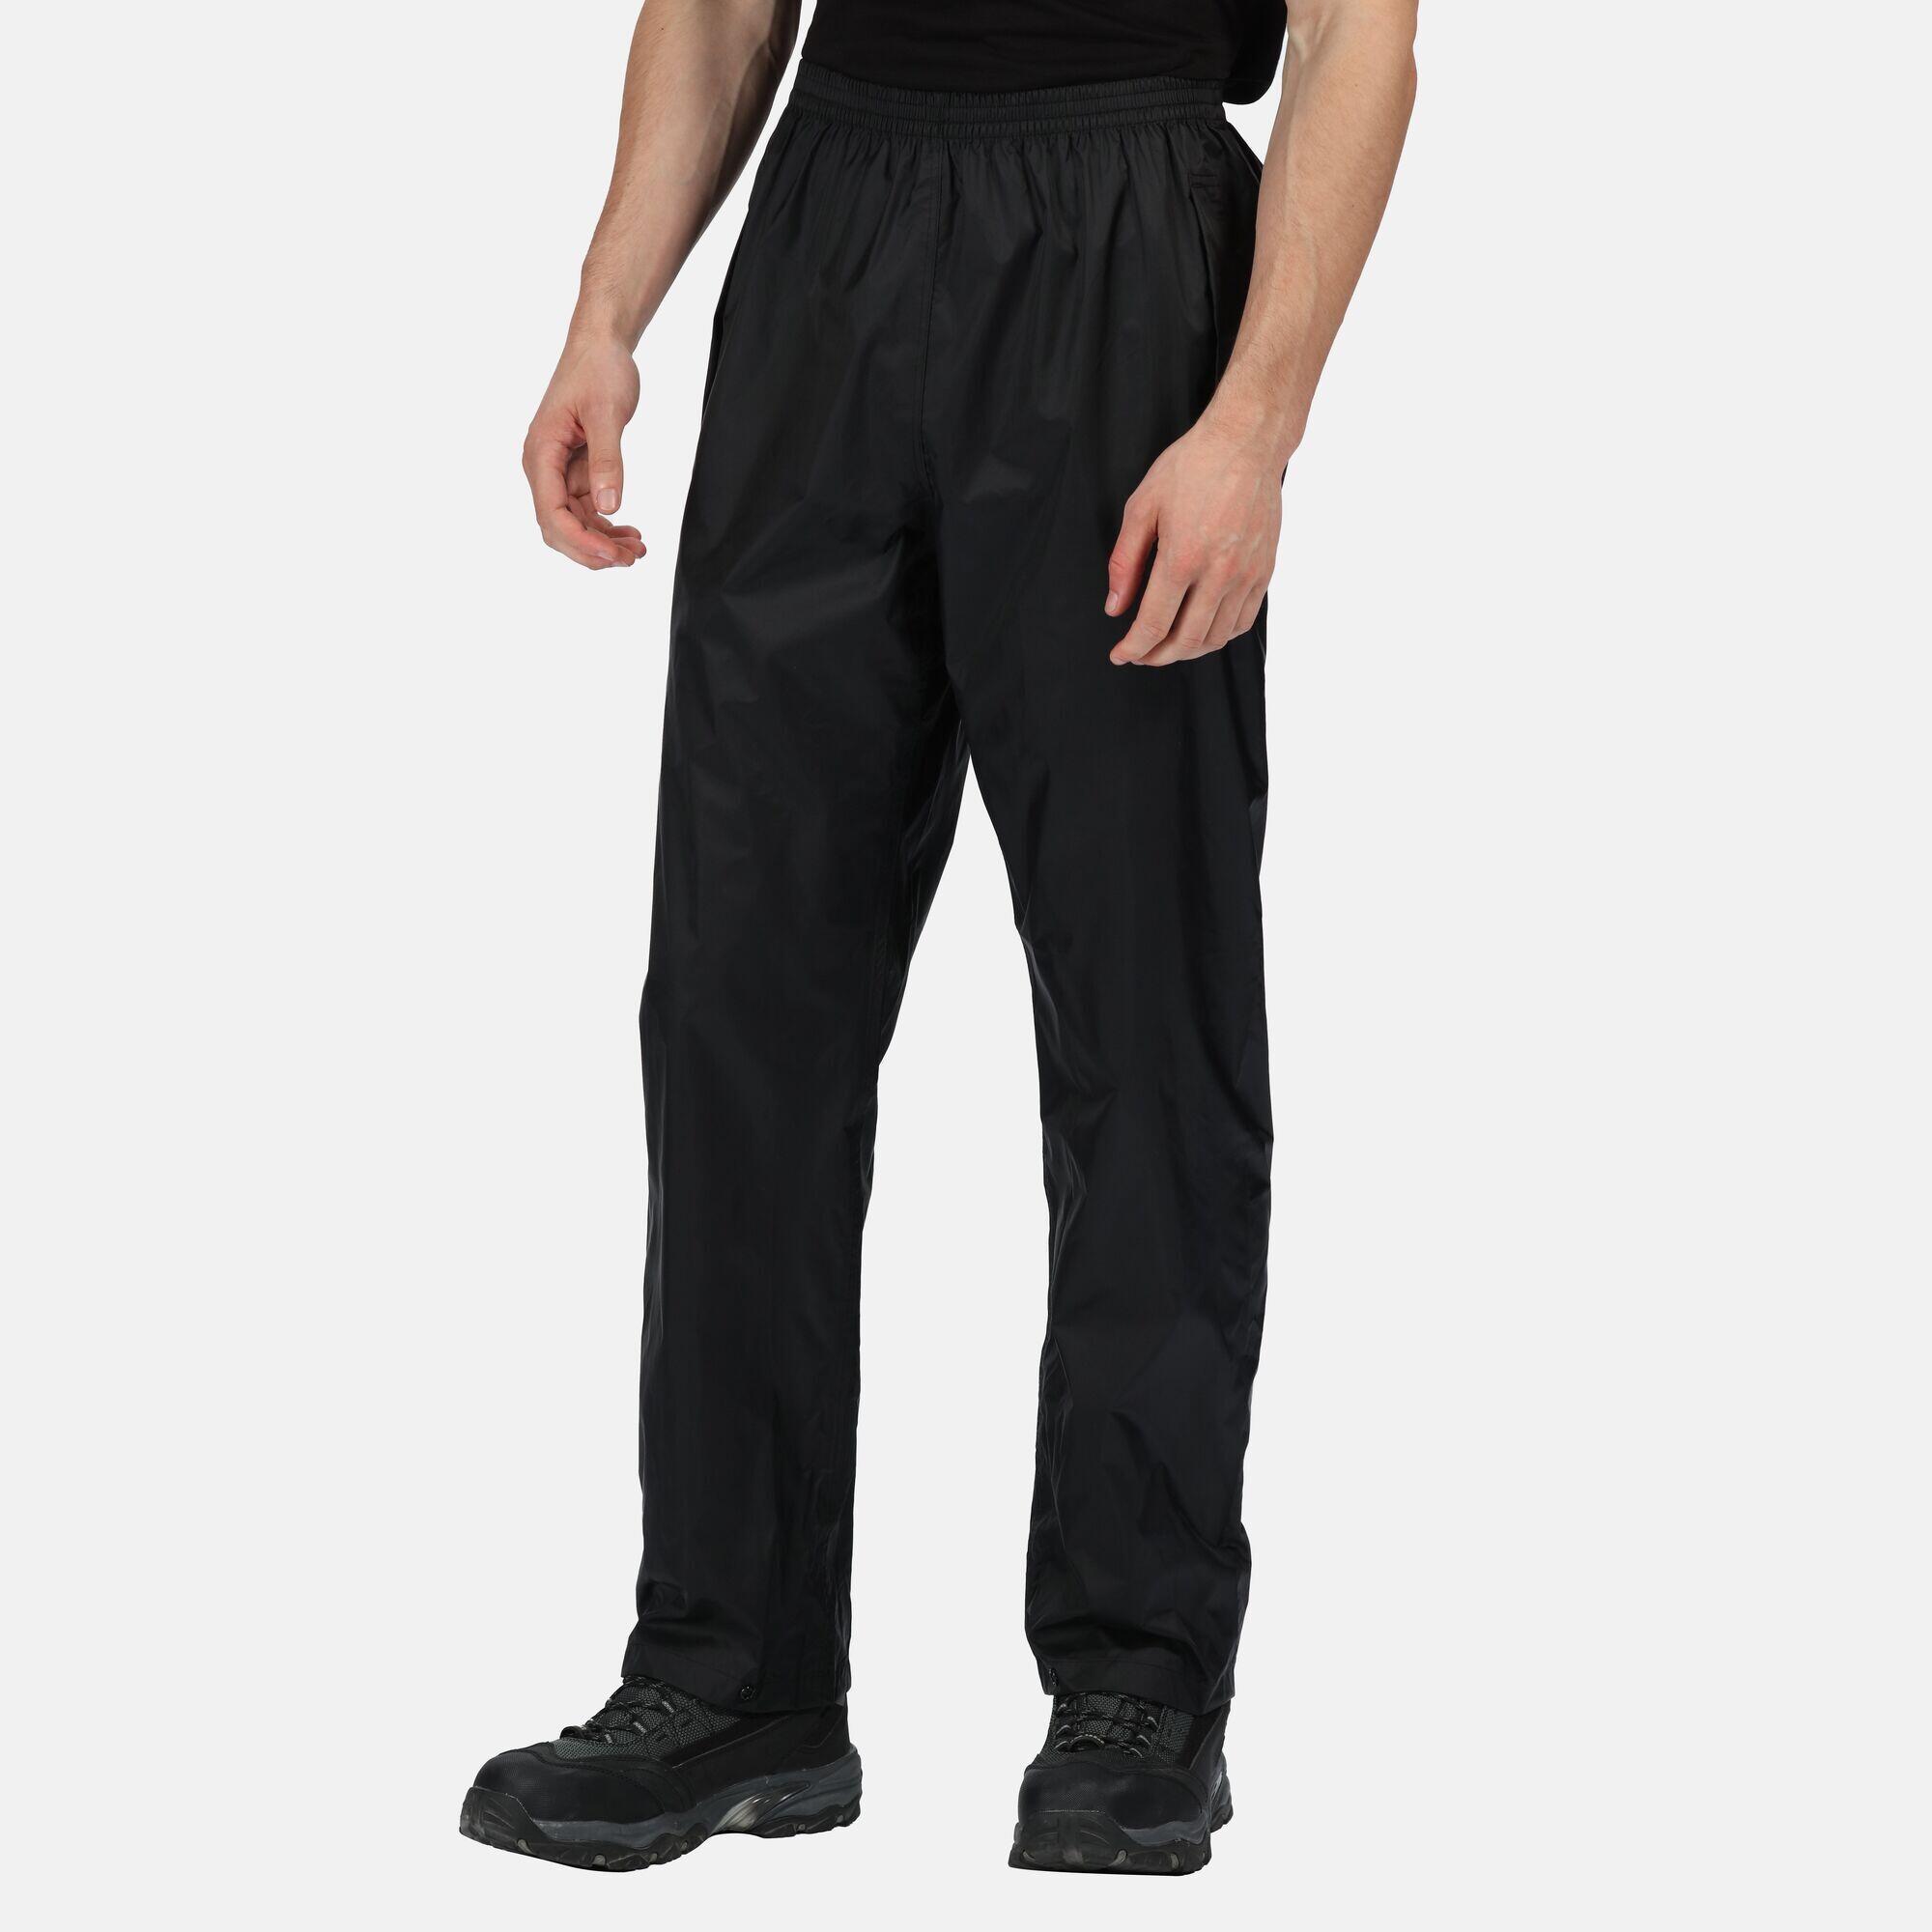 Mens Pro Packaway Overtrousers (Black) 2/4